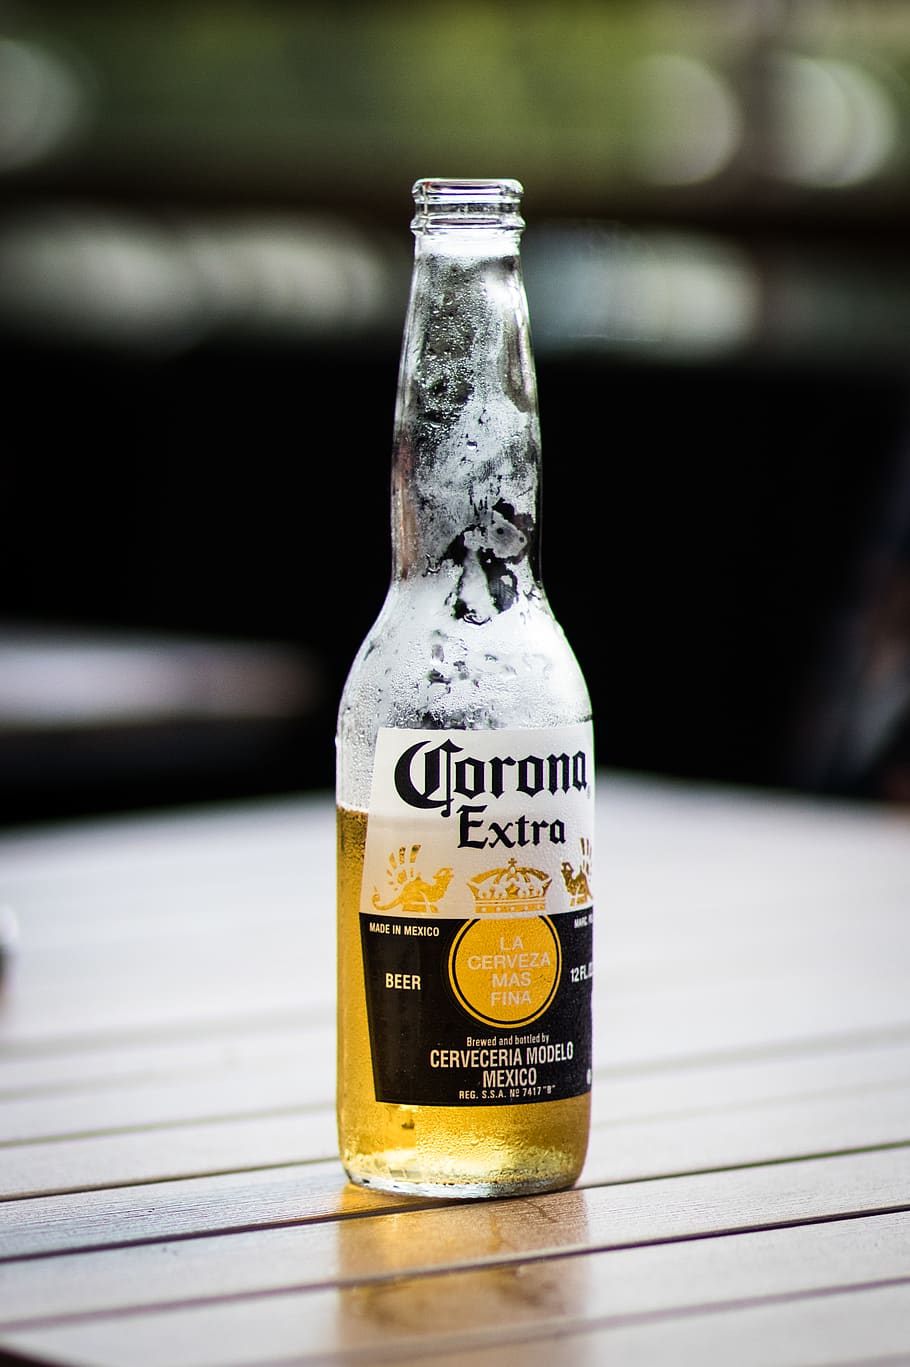 HD wallpaper: Corona Extra beer bottle on brown wooden surface during  daytime | Wallpaper Flare